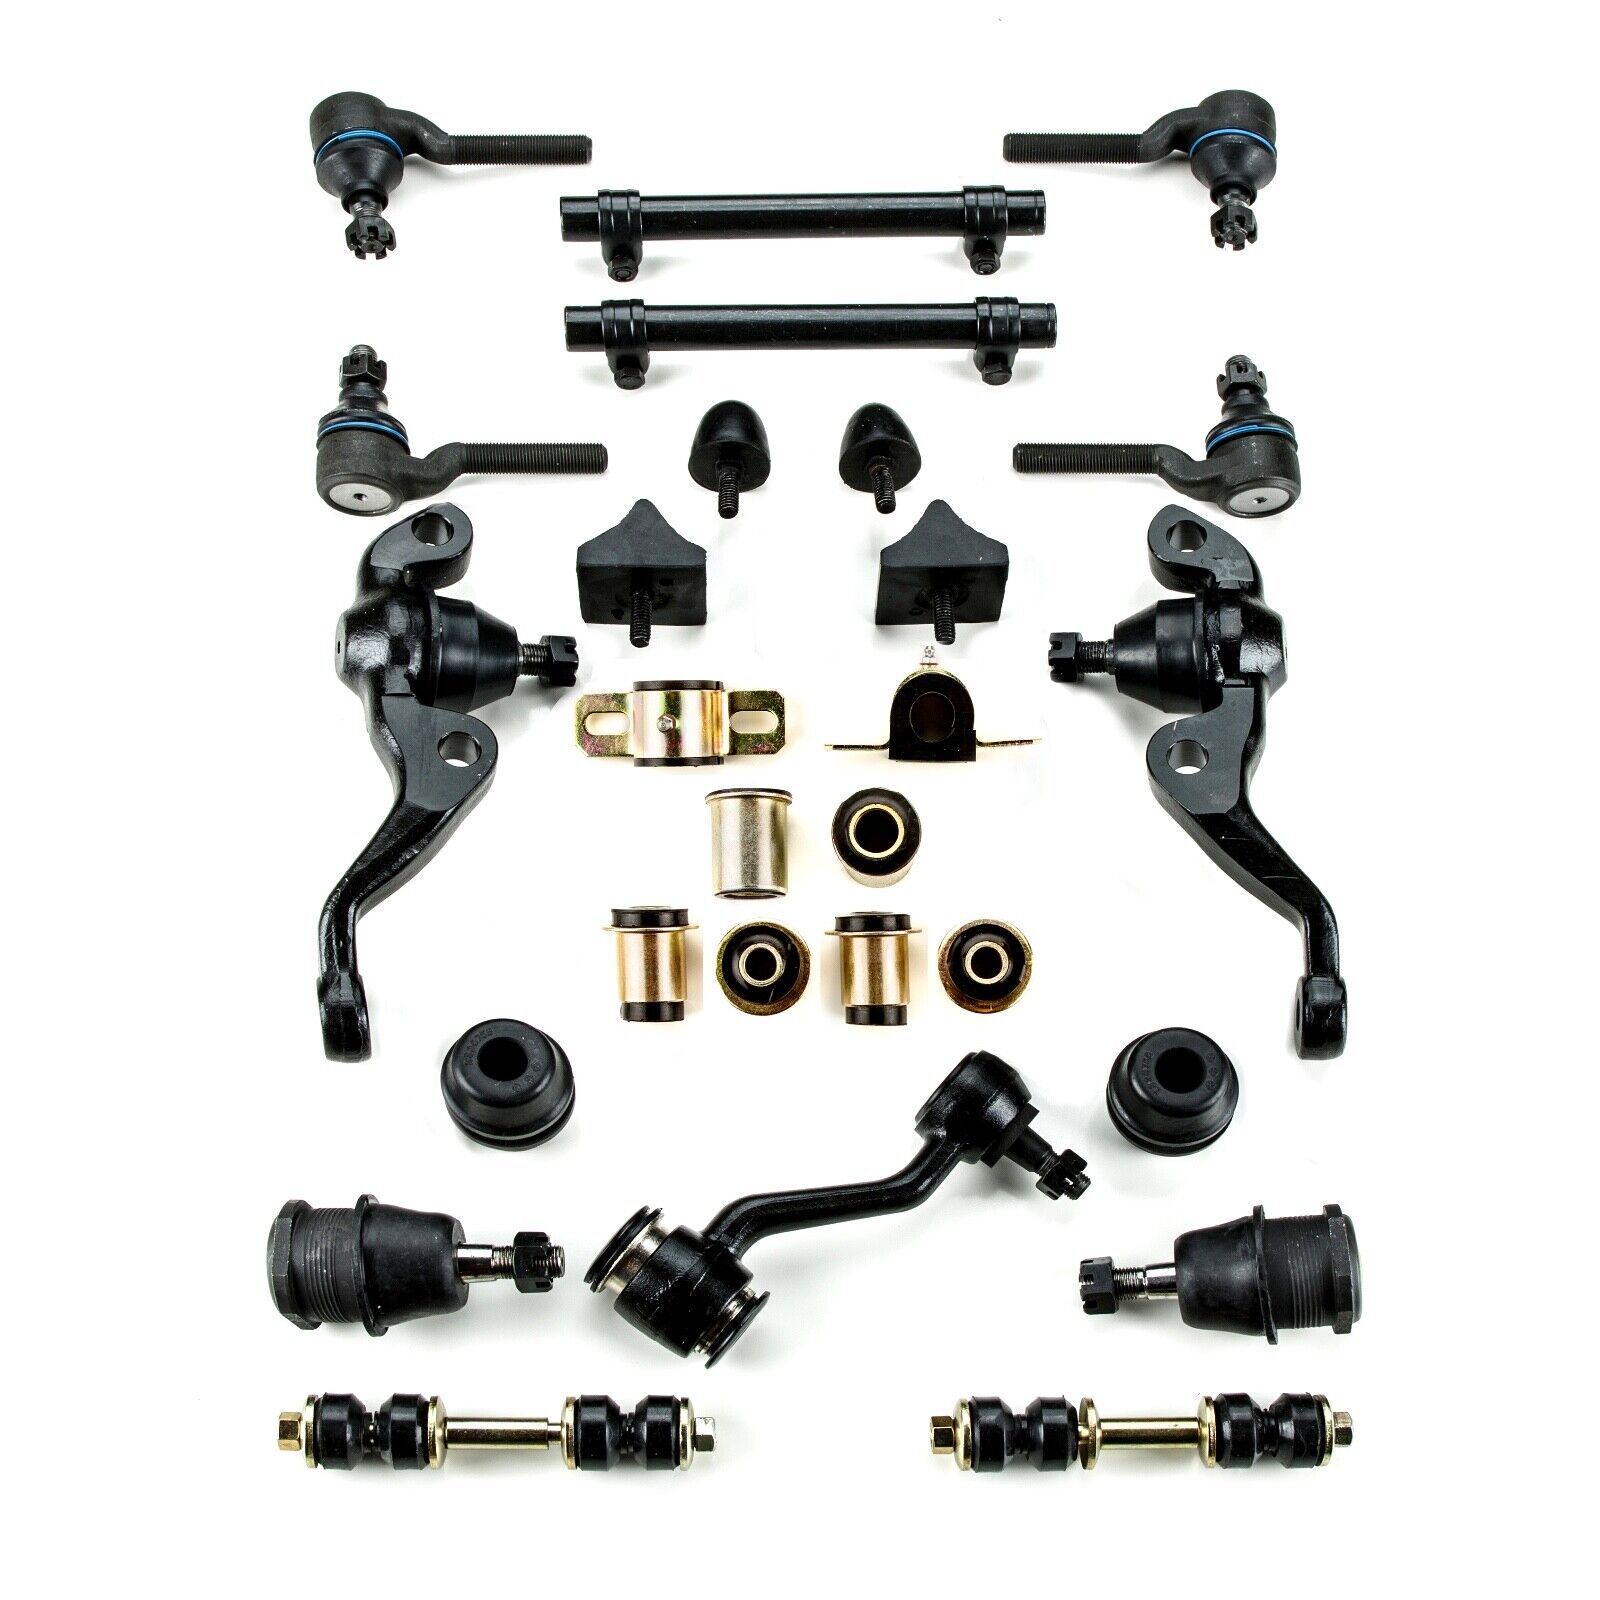 Black Poly Front End Suspension Master Kit For 1970 - 1972 Dodge Charger Coronet